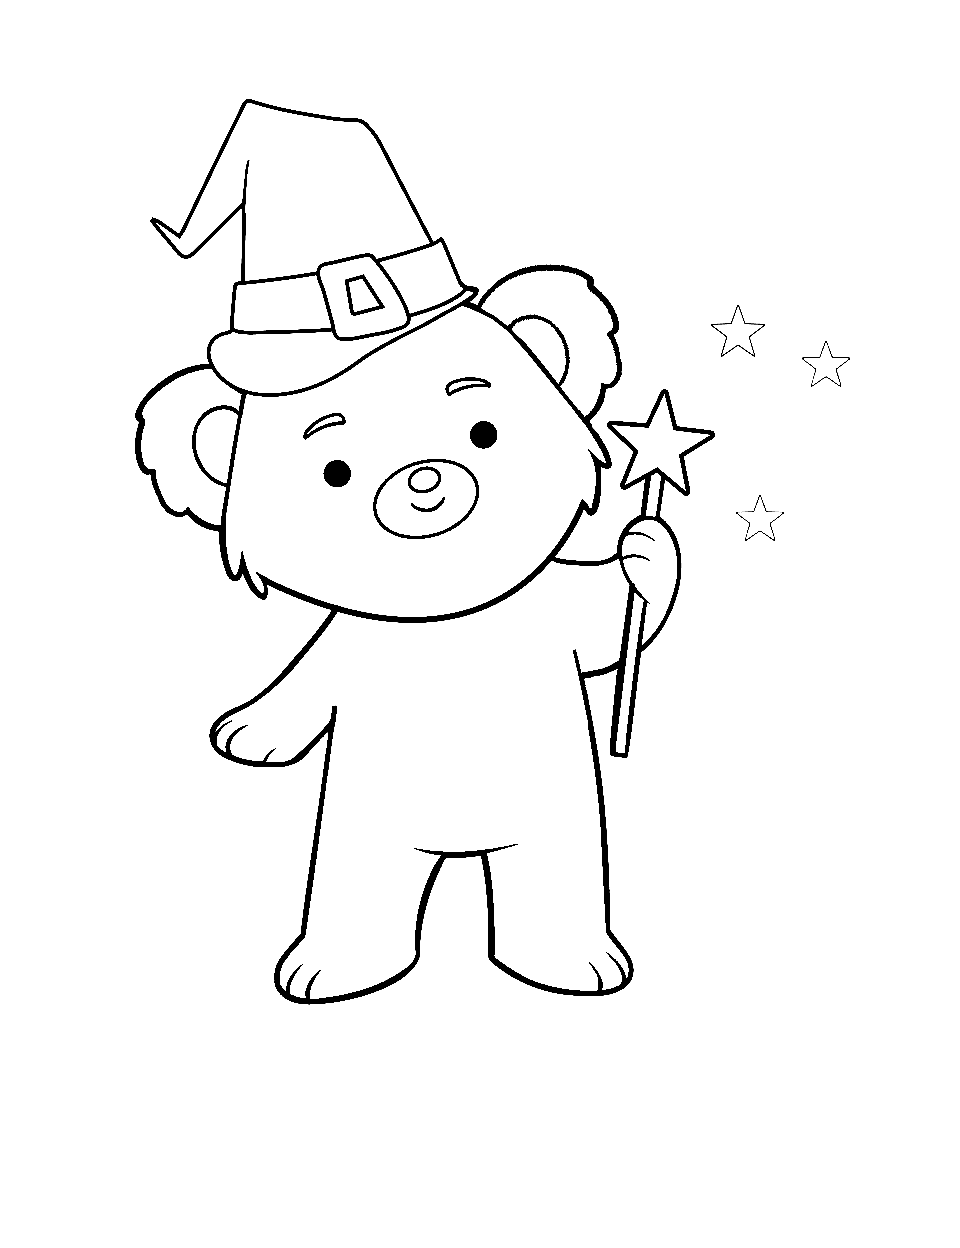 Bear's Magical Wand Coloring Page - A bear dressed as a wizard casting a magical spell.